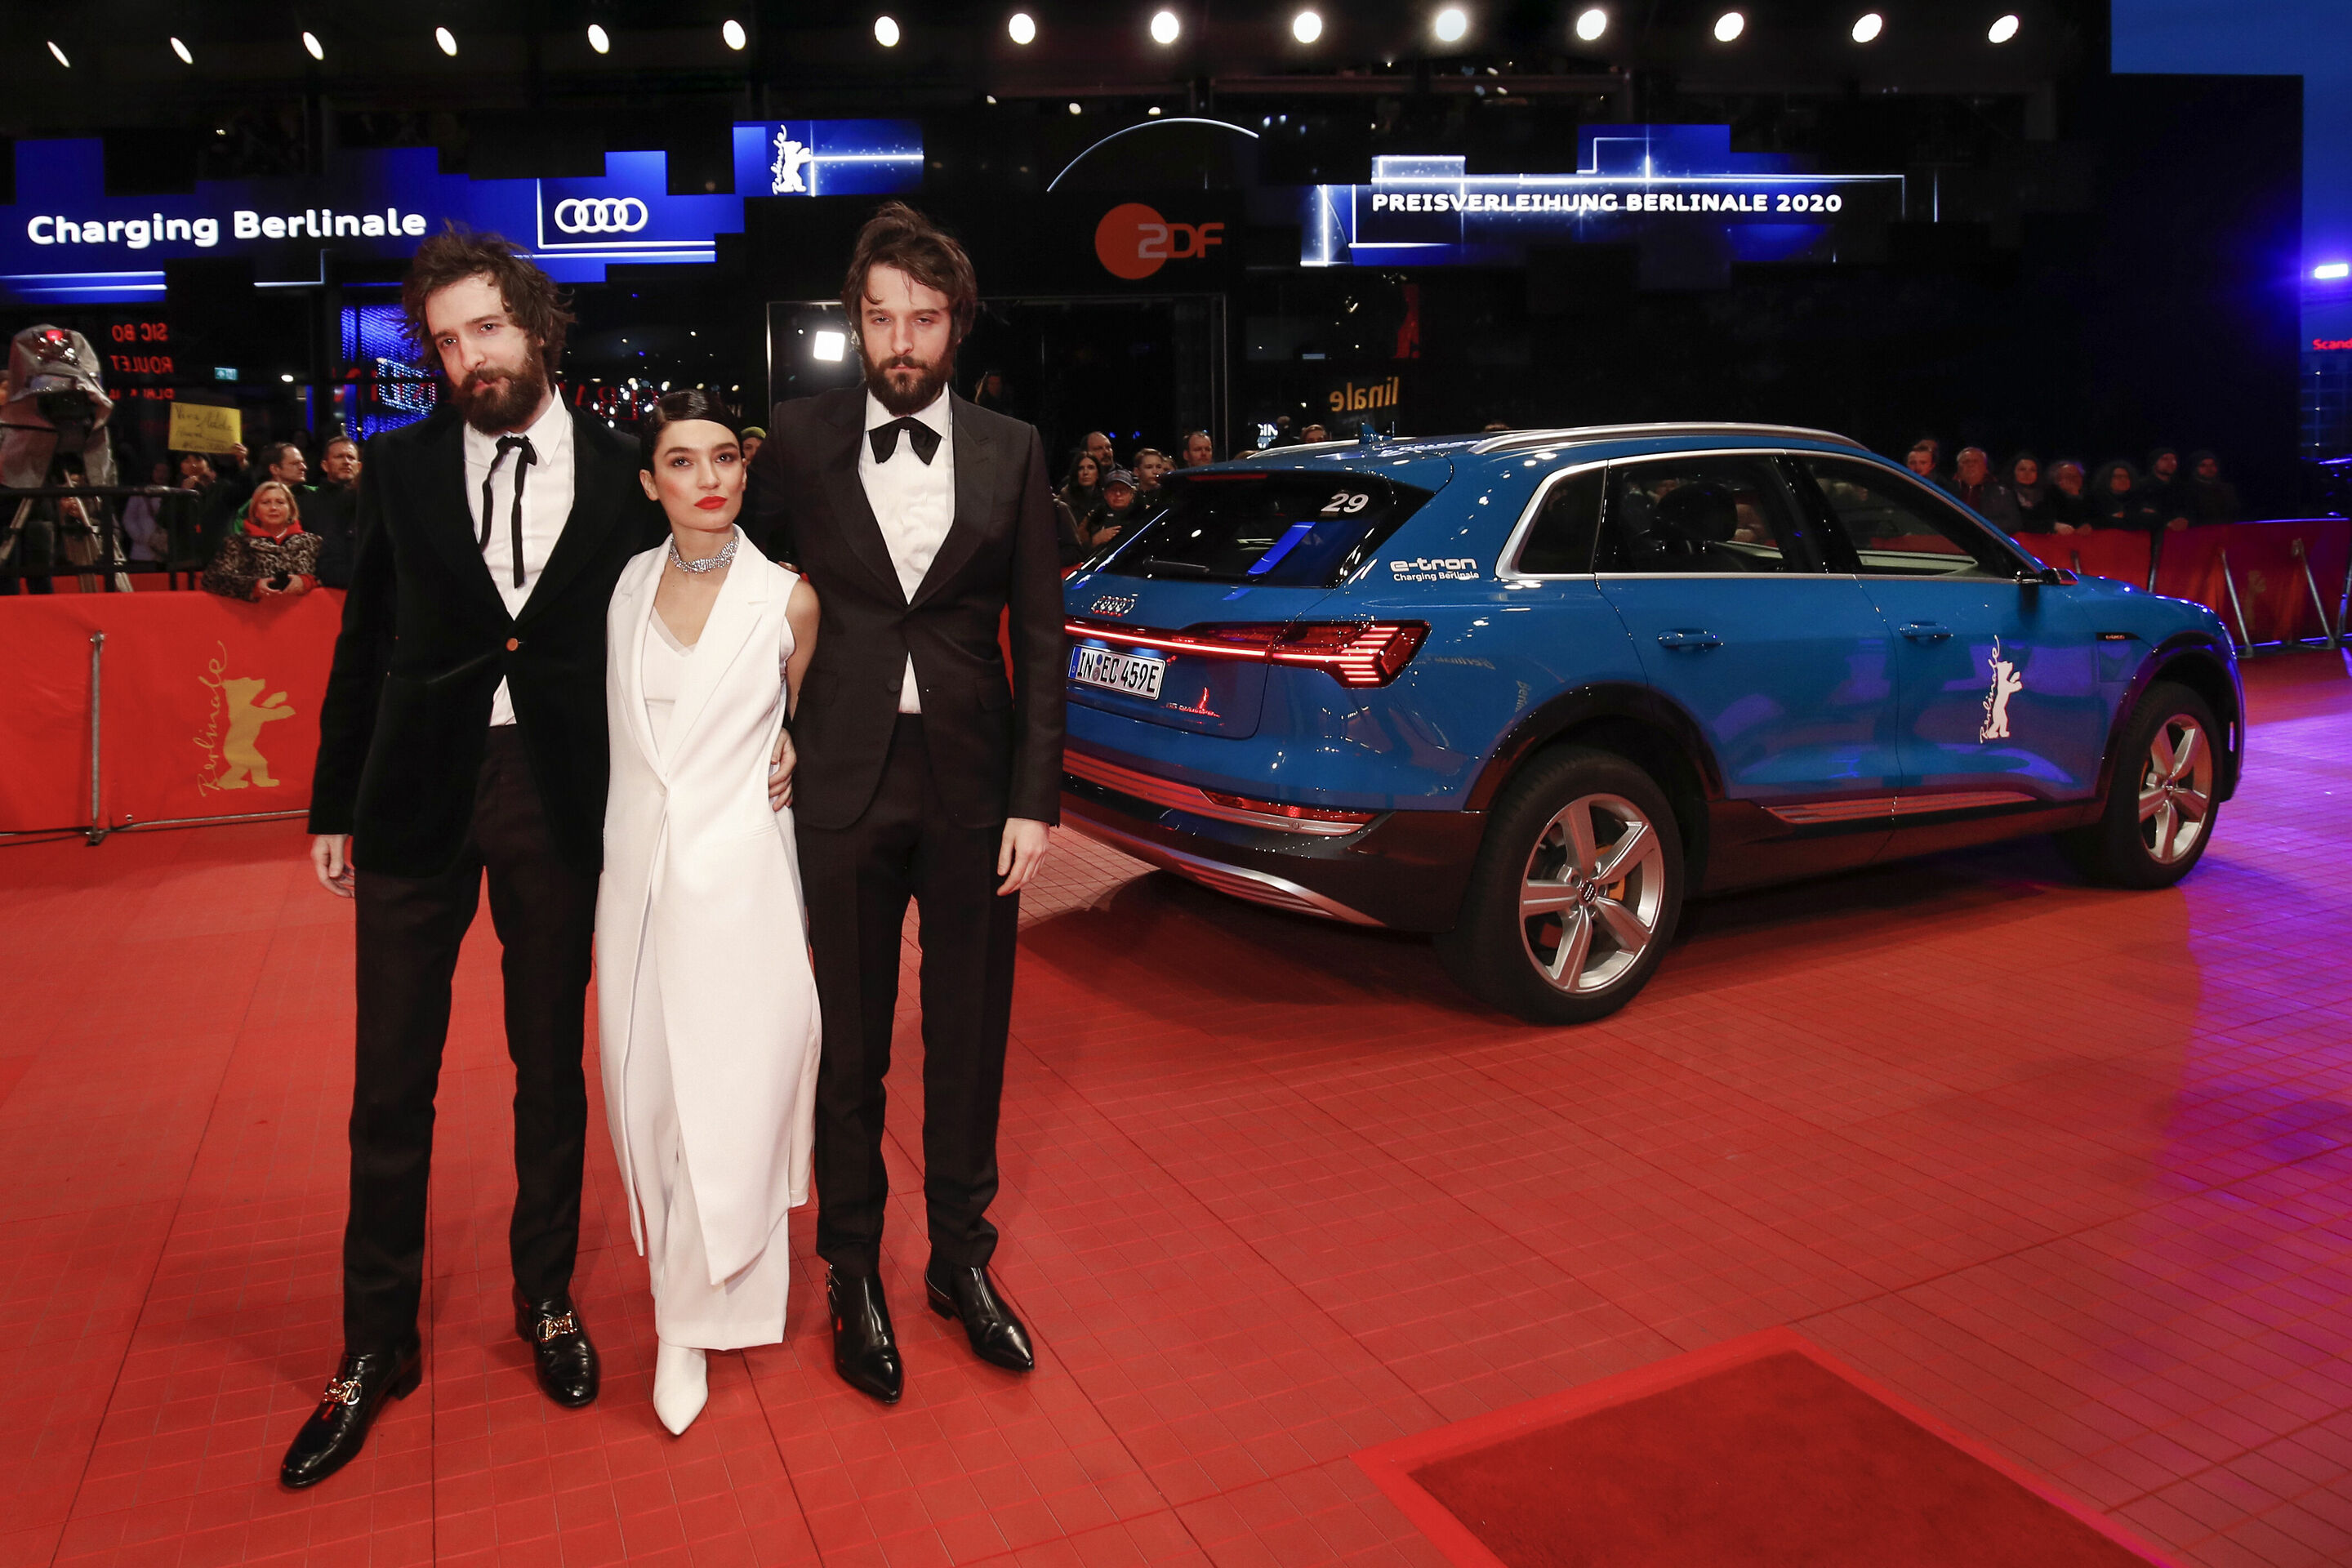 Audi at the 70. Berlinale